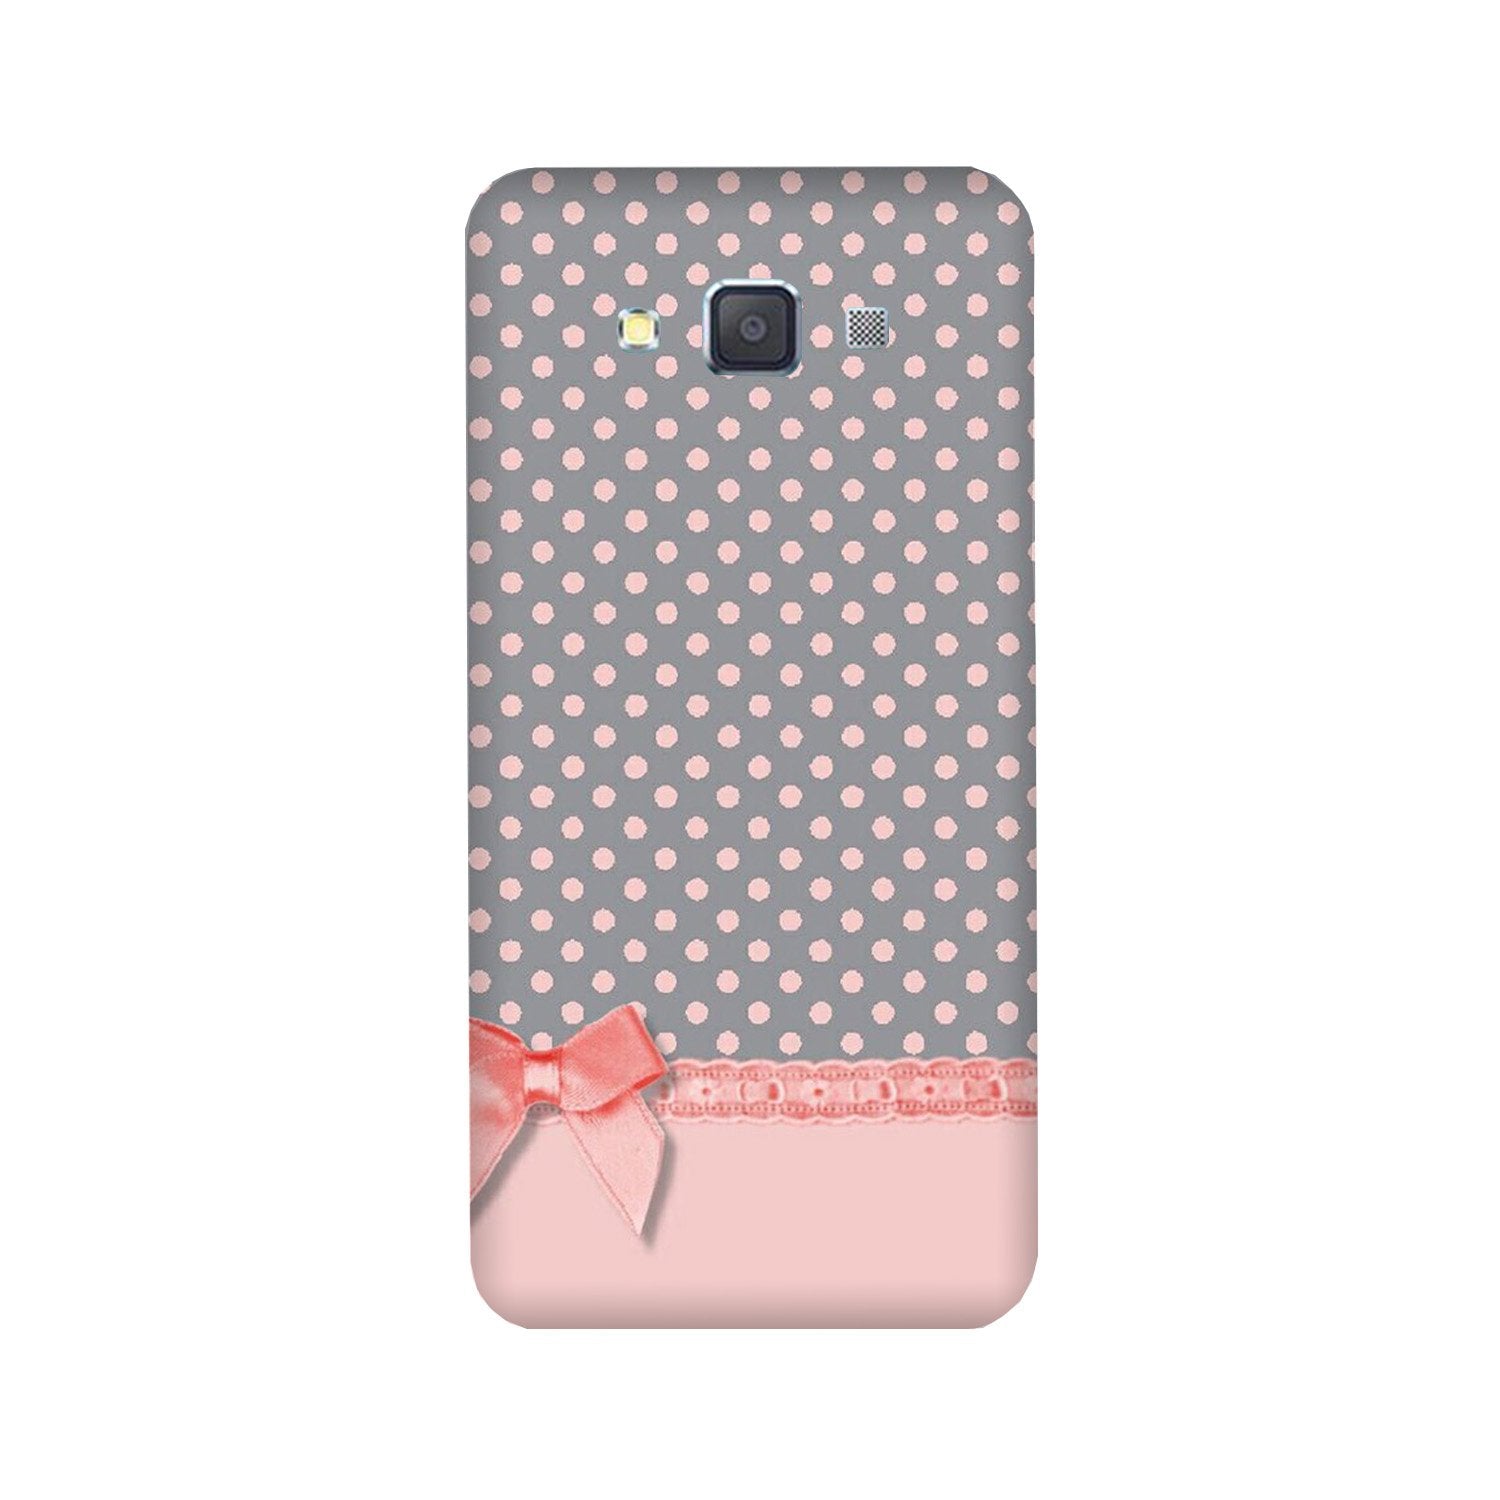 Gift Wrap2 Case for Galaxy ON5/ON5 Pro